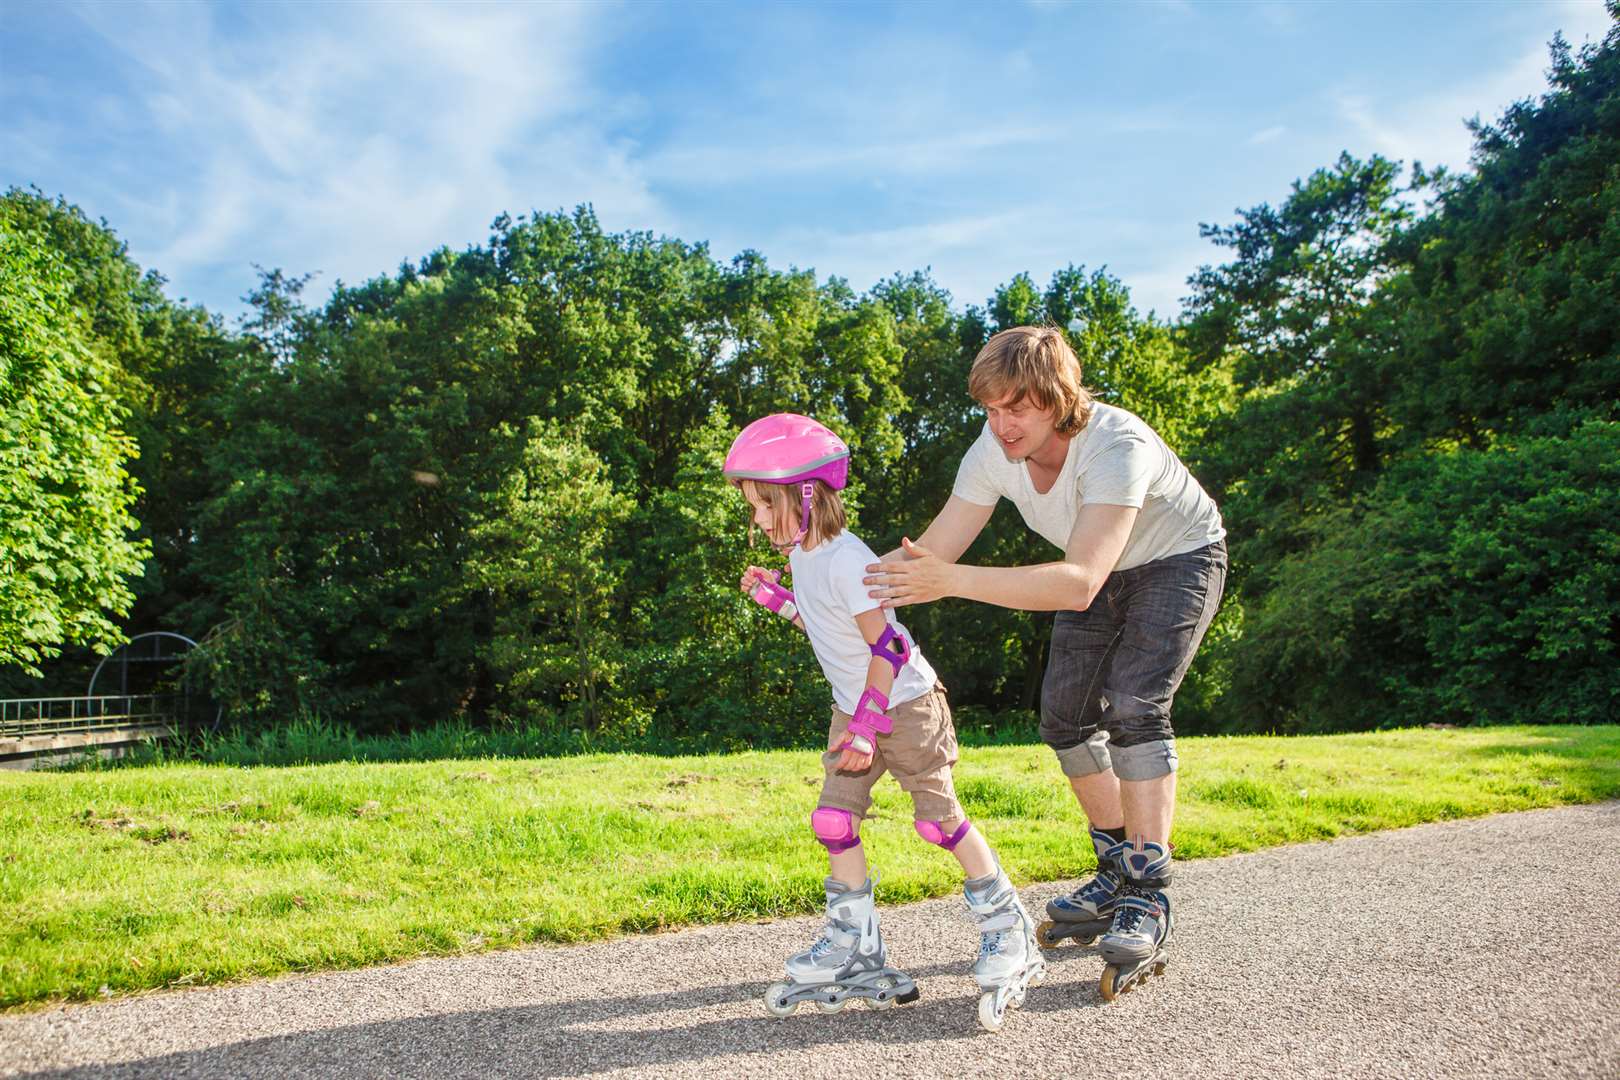 Roller skating is all part of being a dad - if you've a daughter